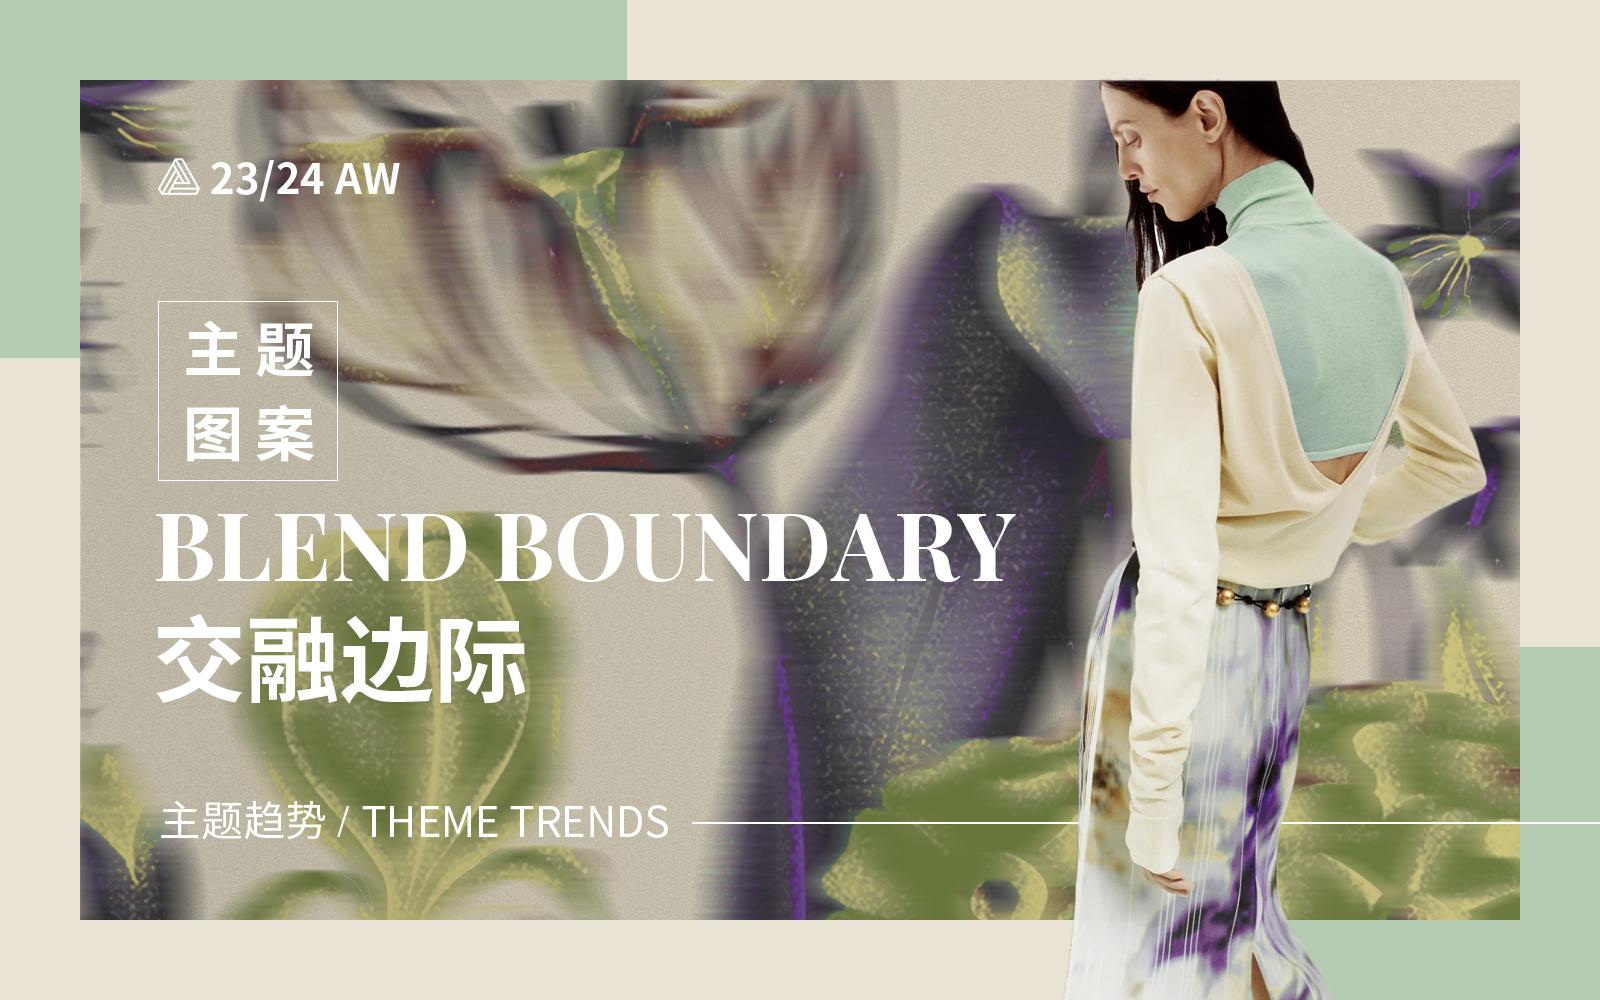 Blend Boundary -- The A/W 23/24 Thematic Pattern Trend